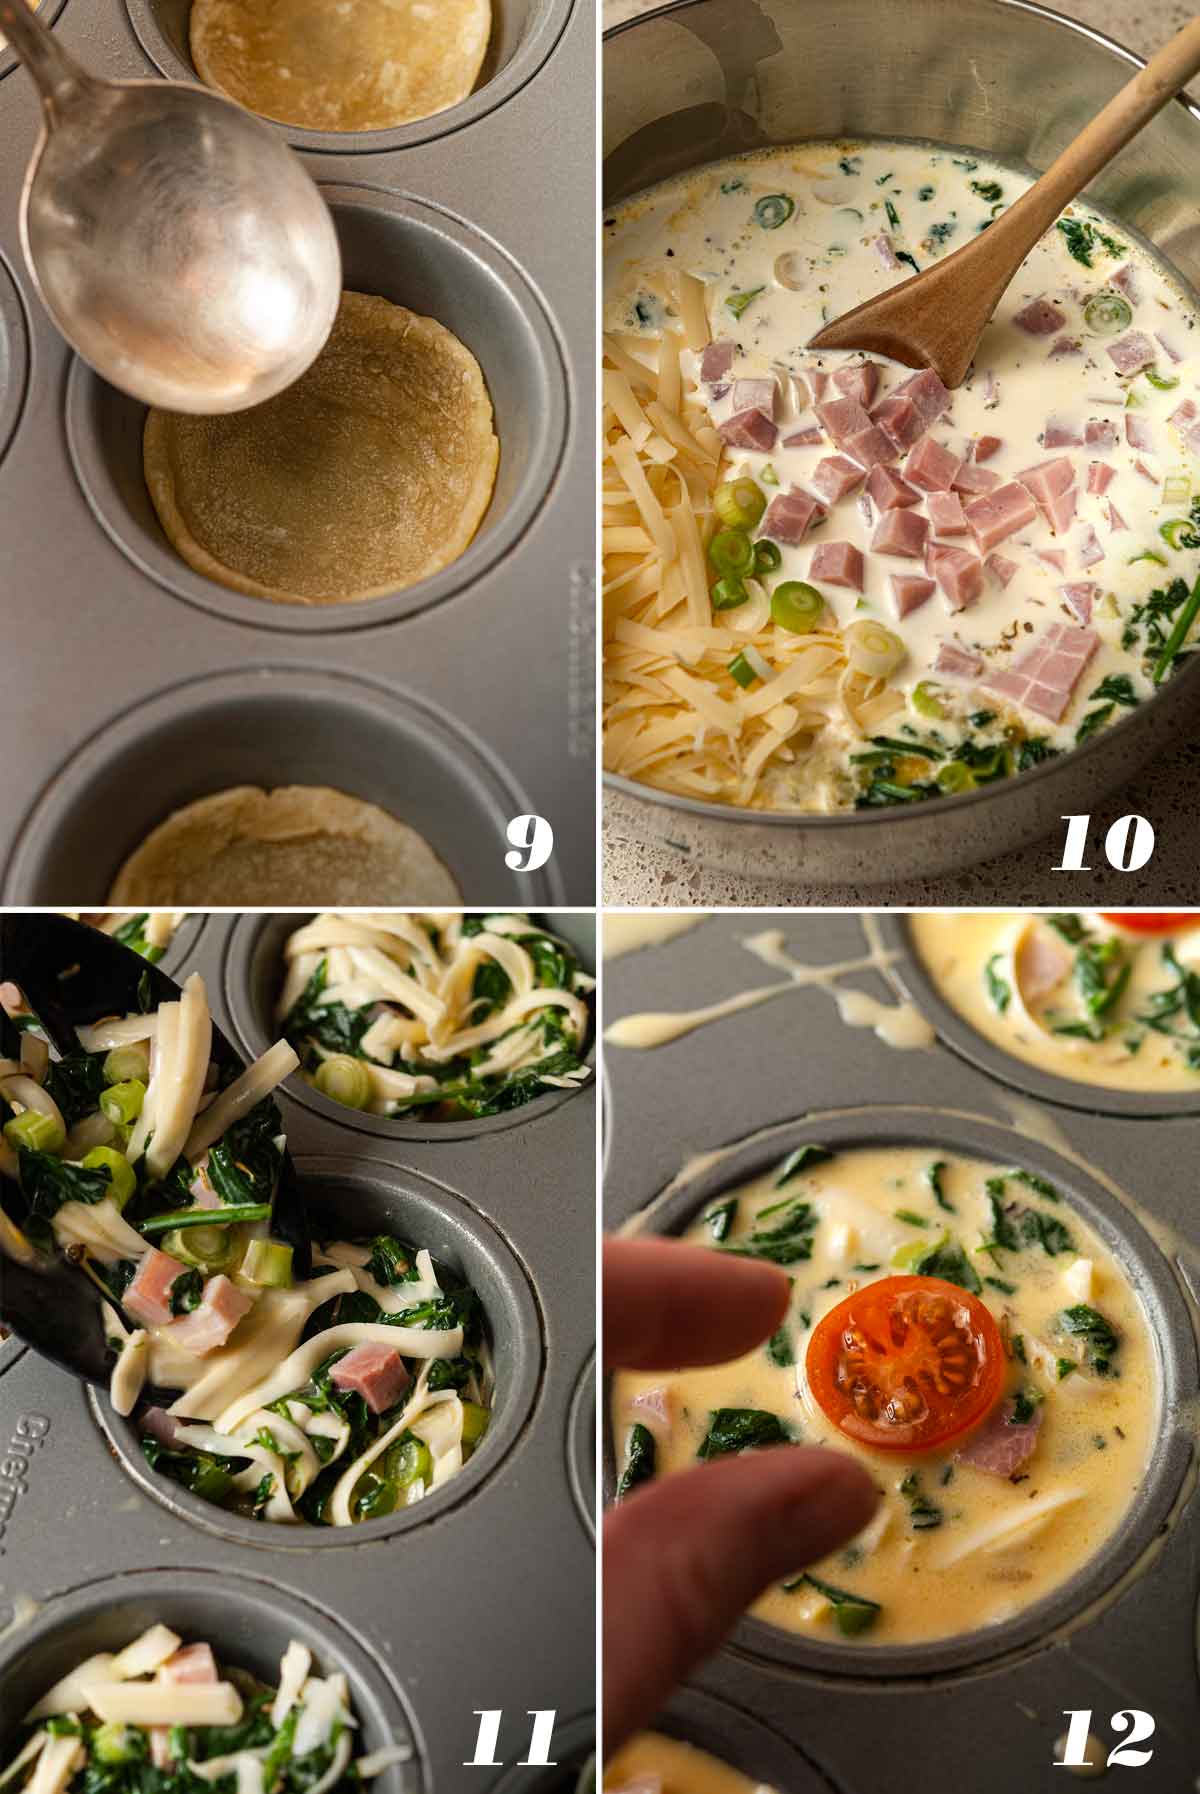 A collage of 4 numbered images showing how to prepare quiches for baking.